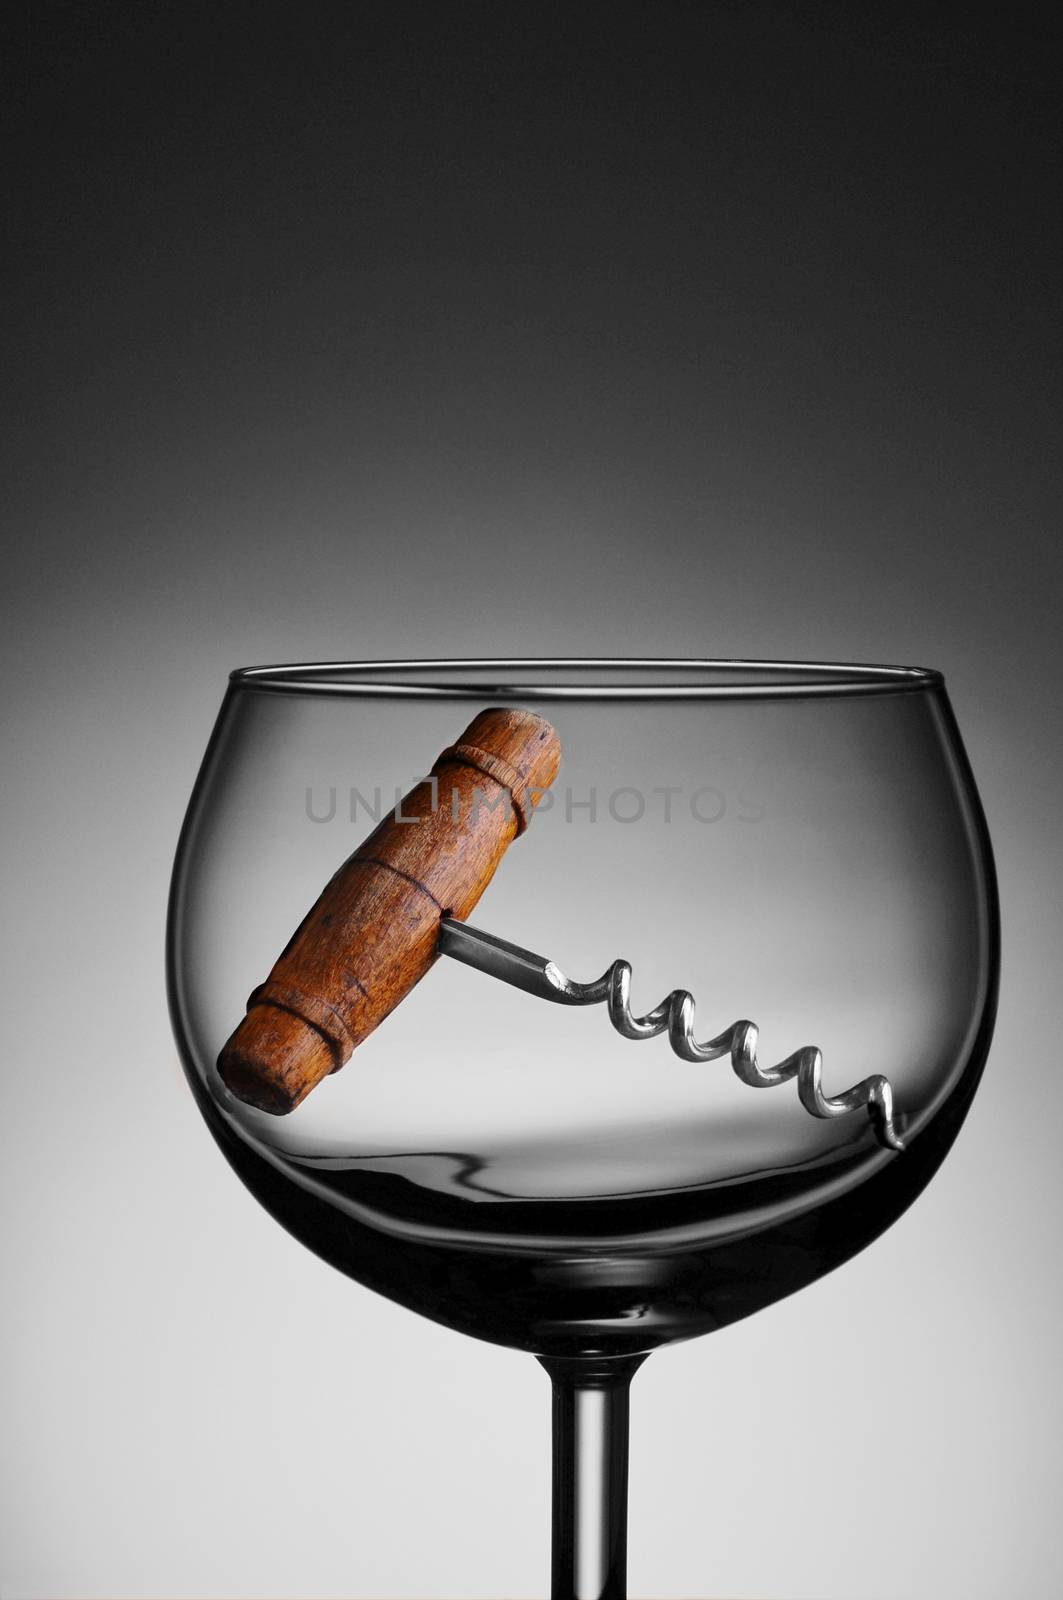 An antique cork screw in a wine glass against a light to dark gray background.